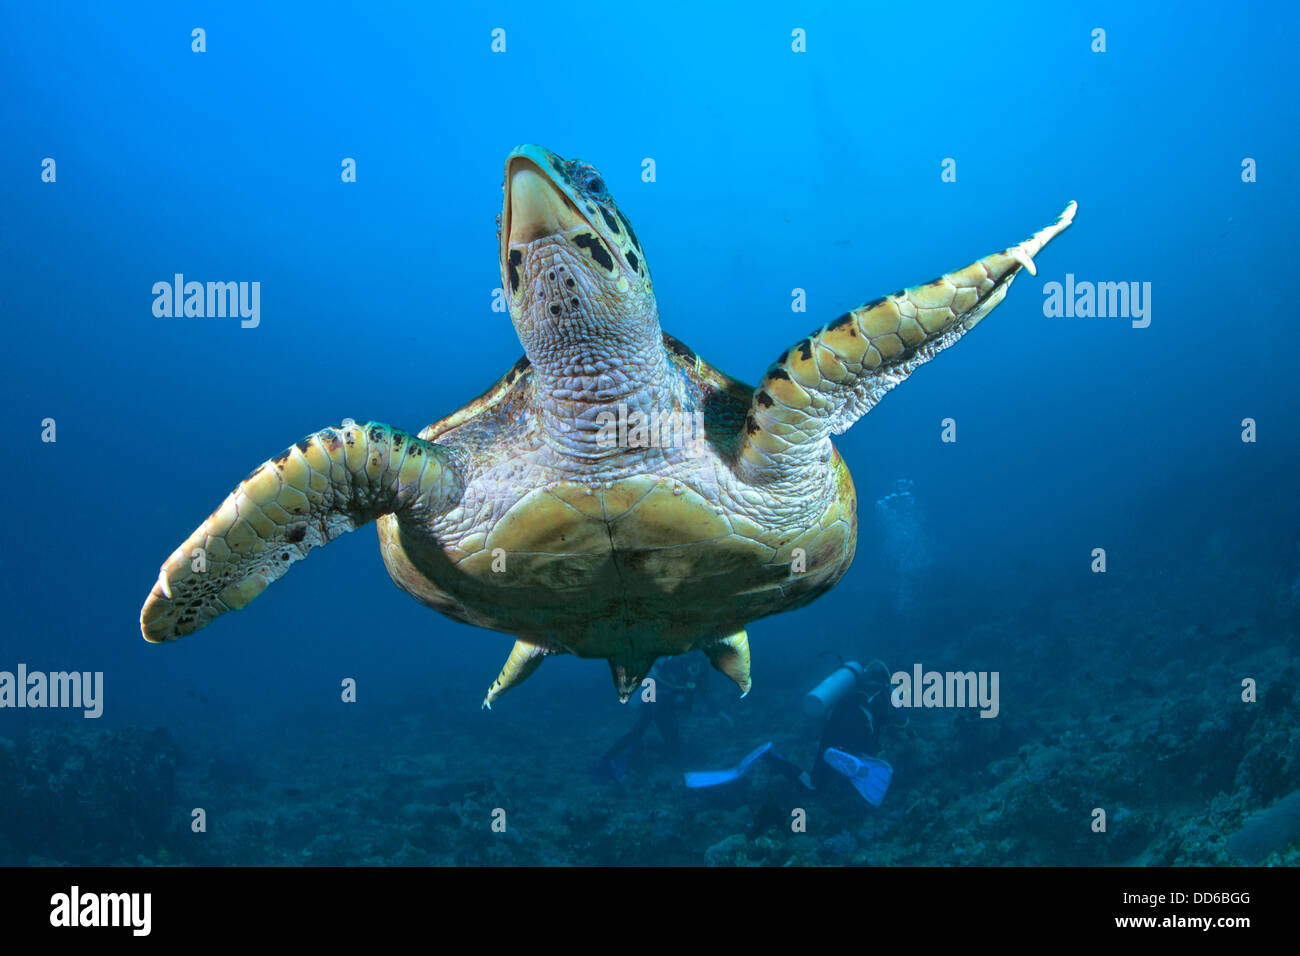 Hawksbill turtle swimming in blue water with scuba divers in background. Stock Photo